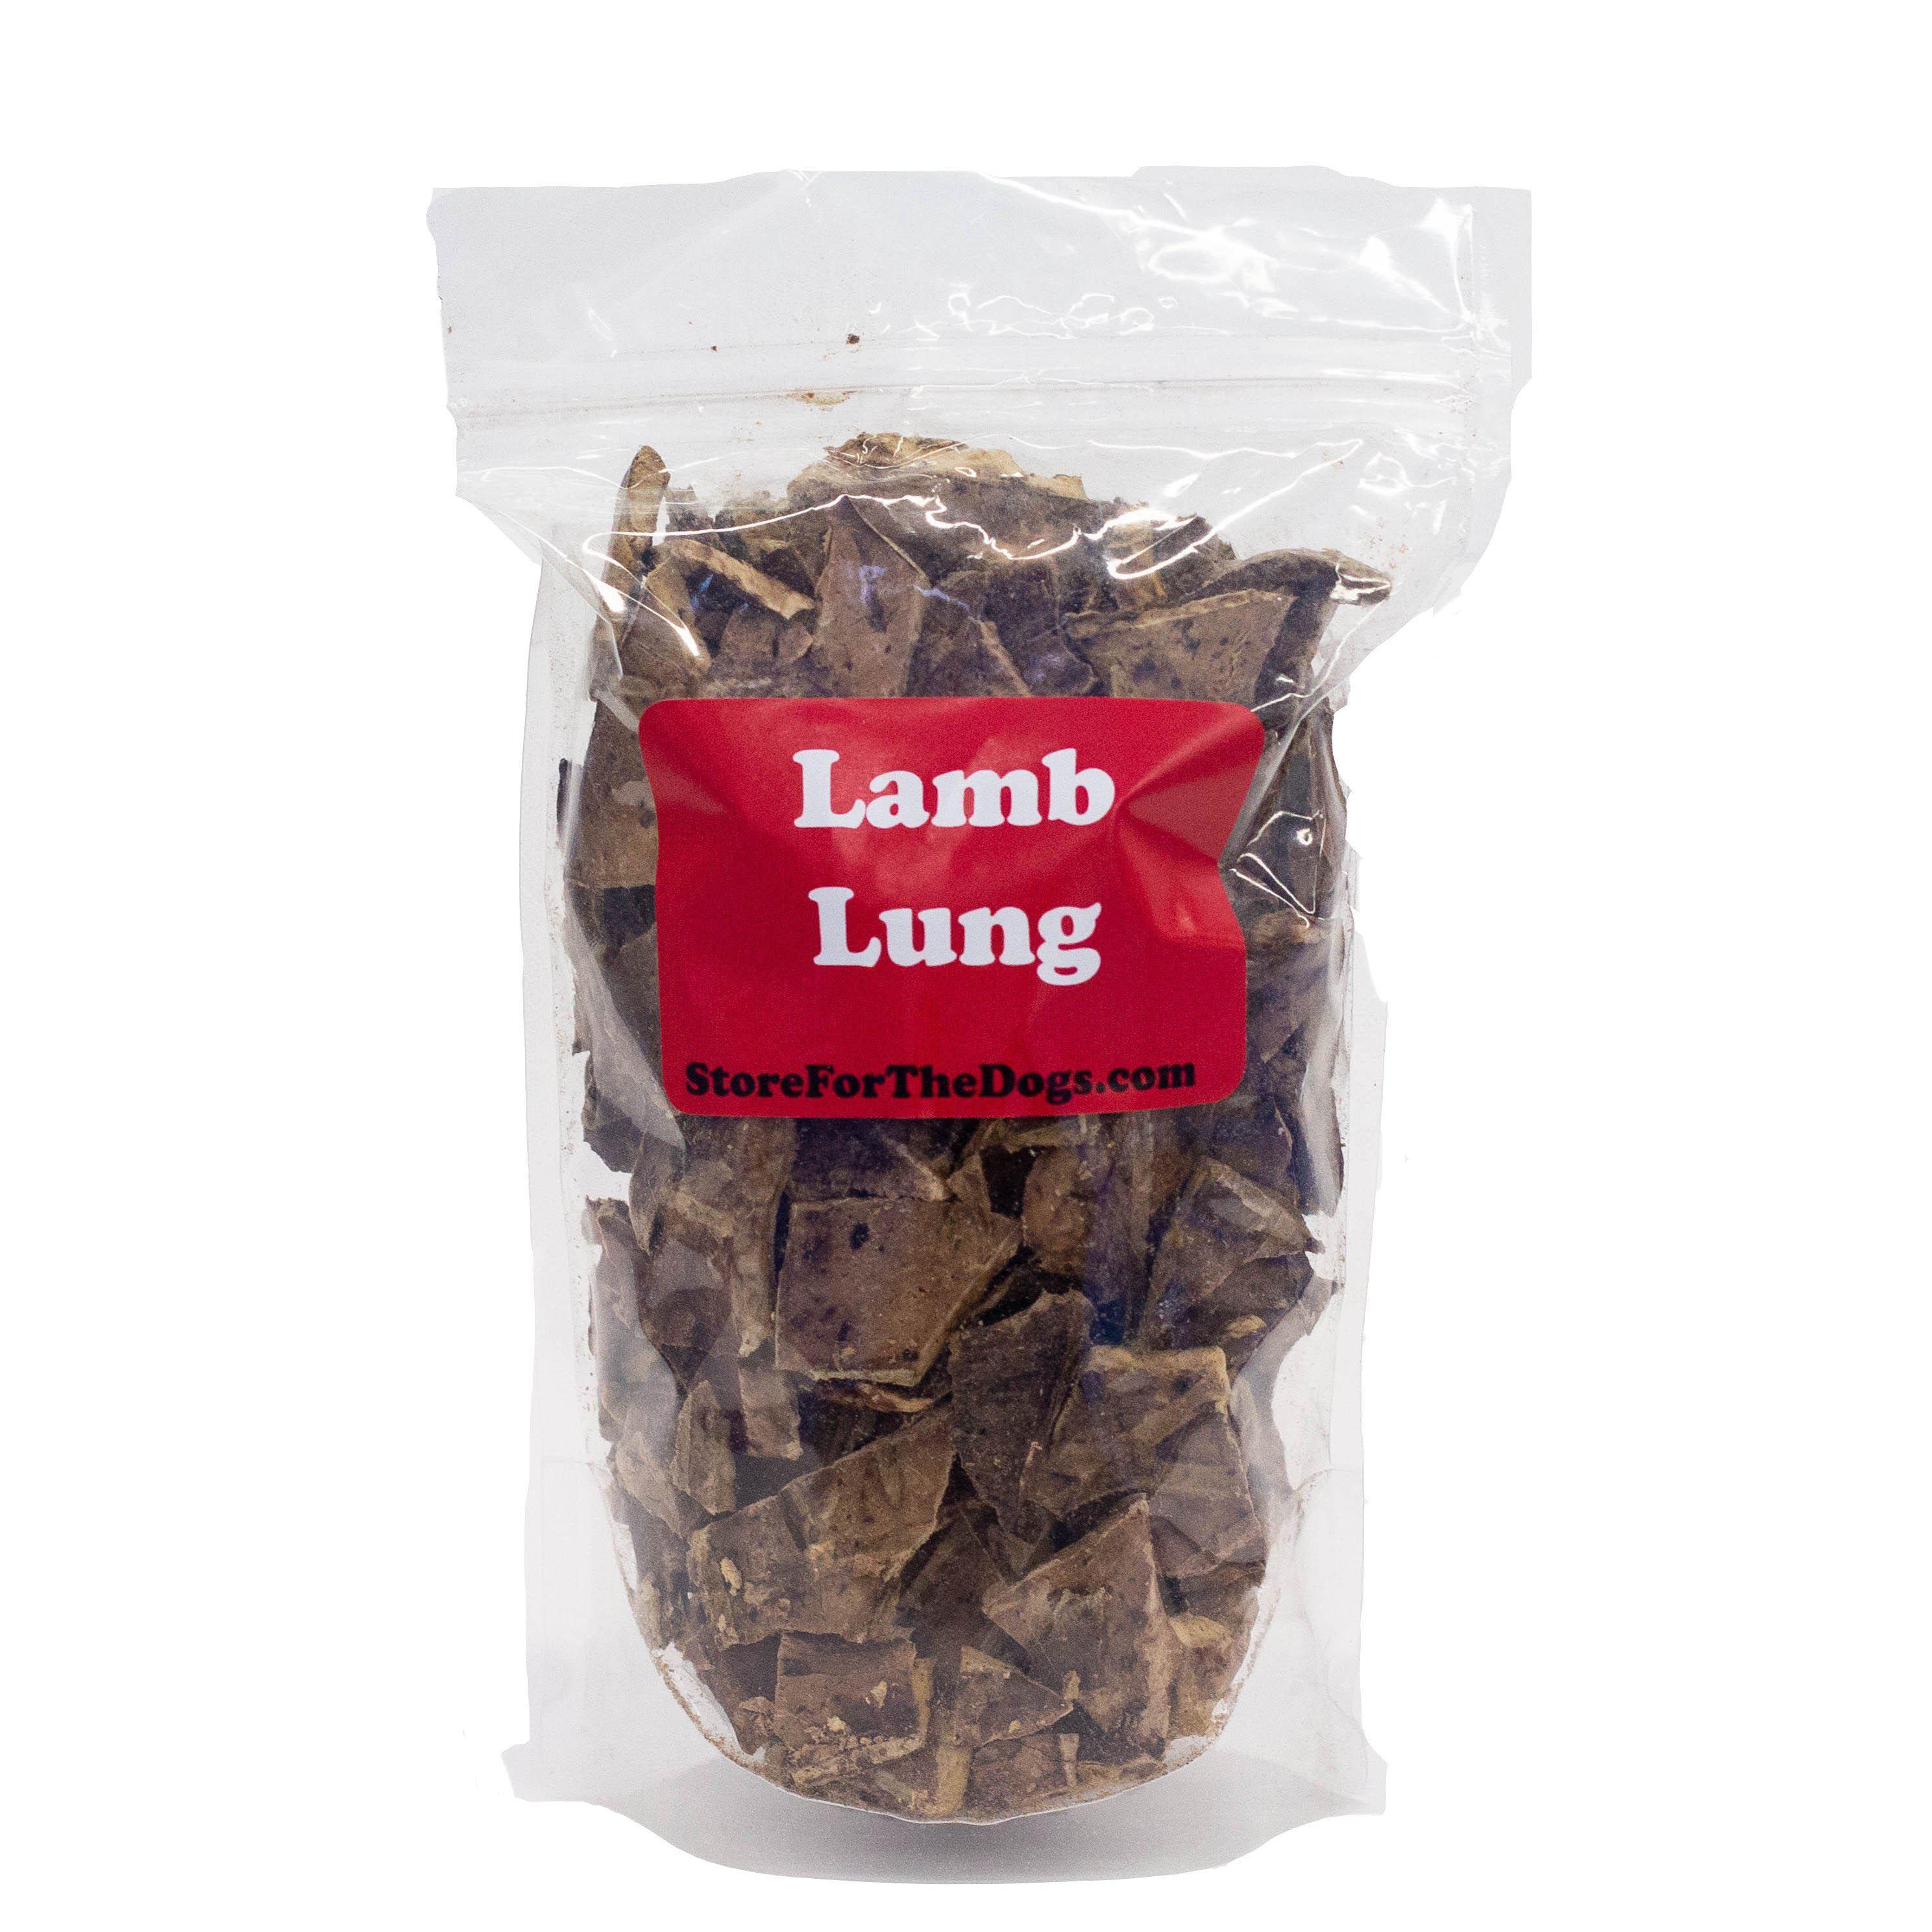 are beef lung treats good for dogs